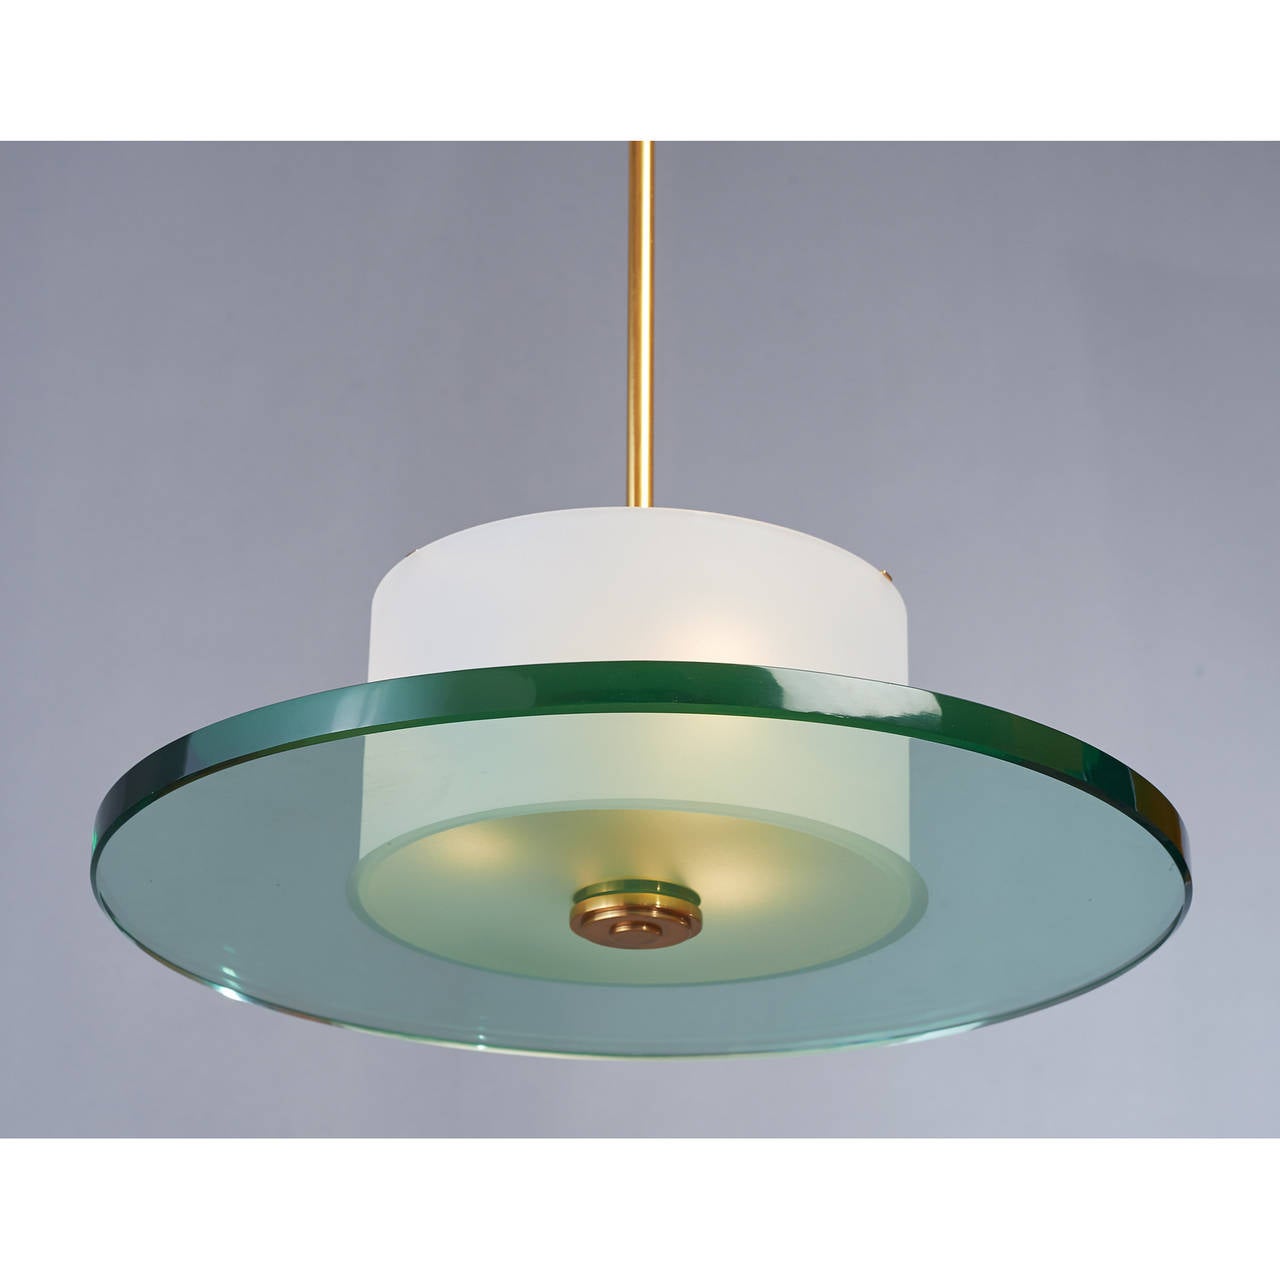 France, 1950s.
Modernist chandelier.
Beautiful glass circular base with frosted center, frosted glass drum, bronze mounts.

Measures: 19 diameter x 33 H.

Rewired for use in the USA with three standard base bulbs.